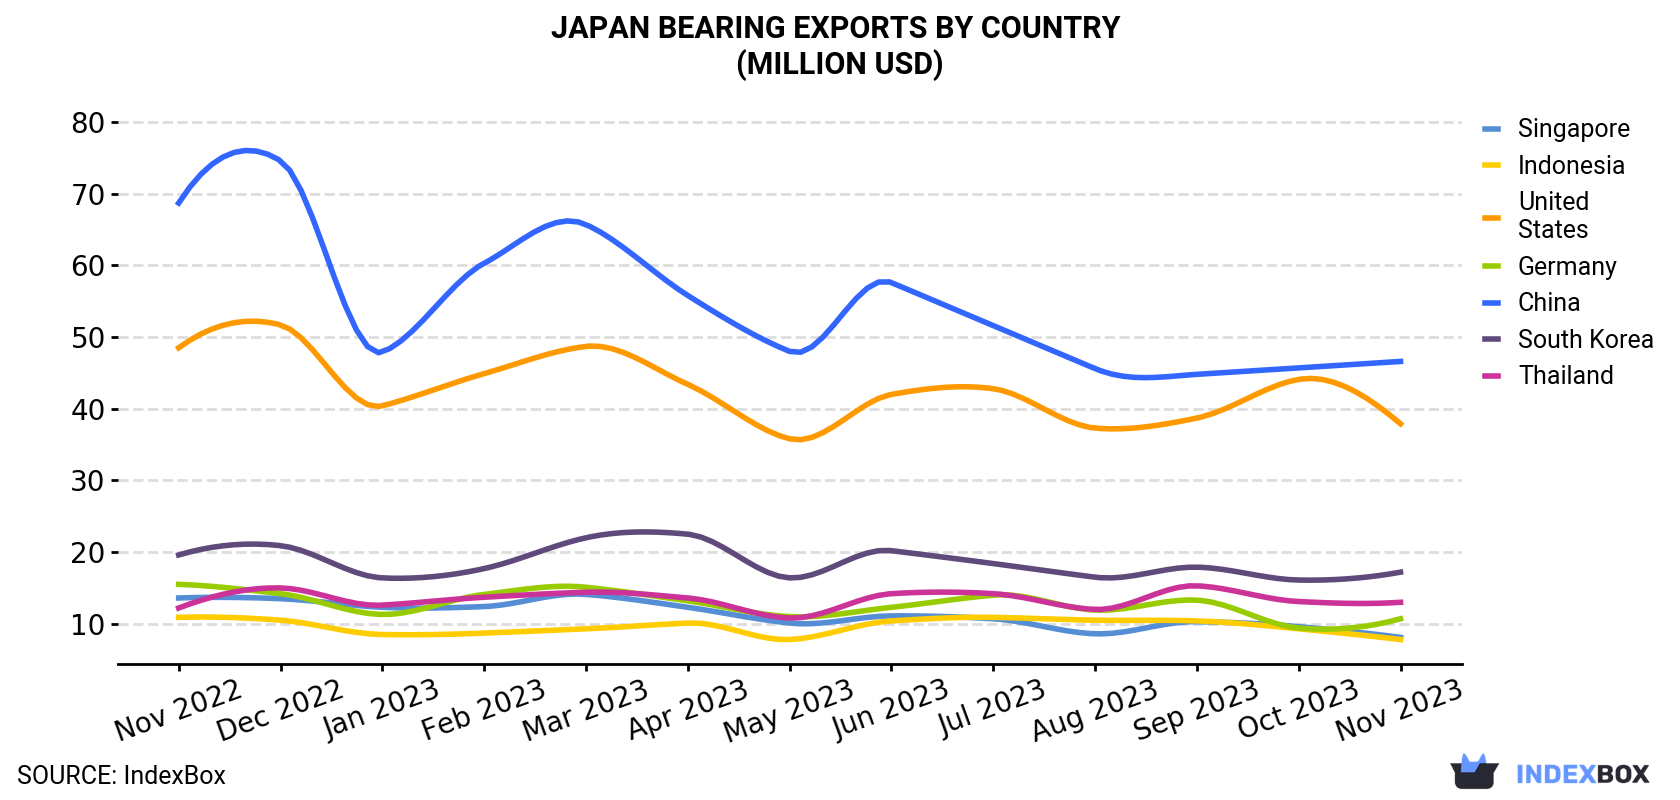 Japan Bearing Exports By Country (Million USD)